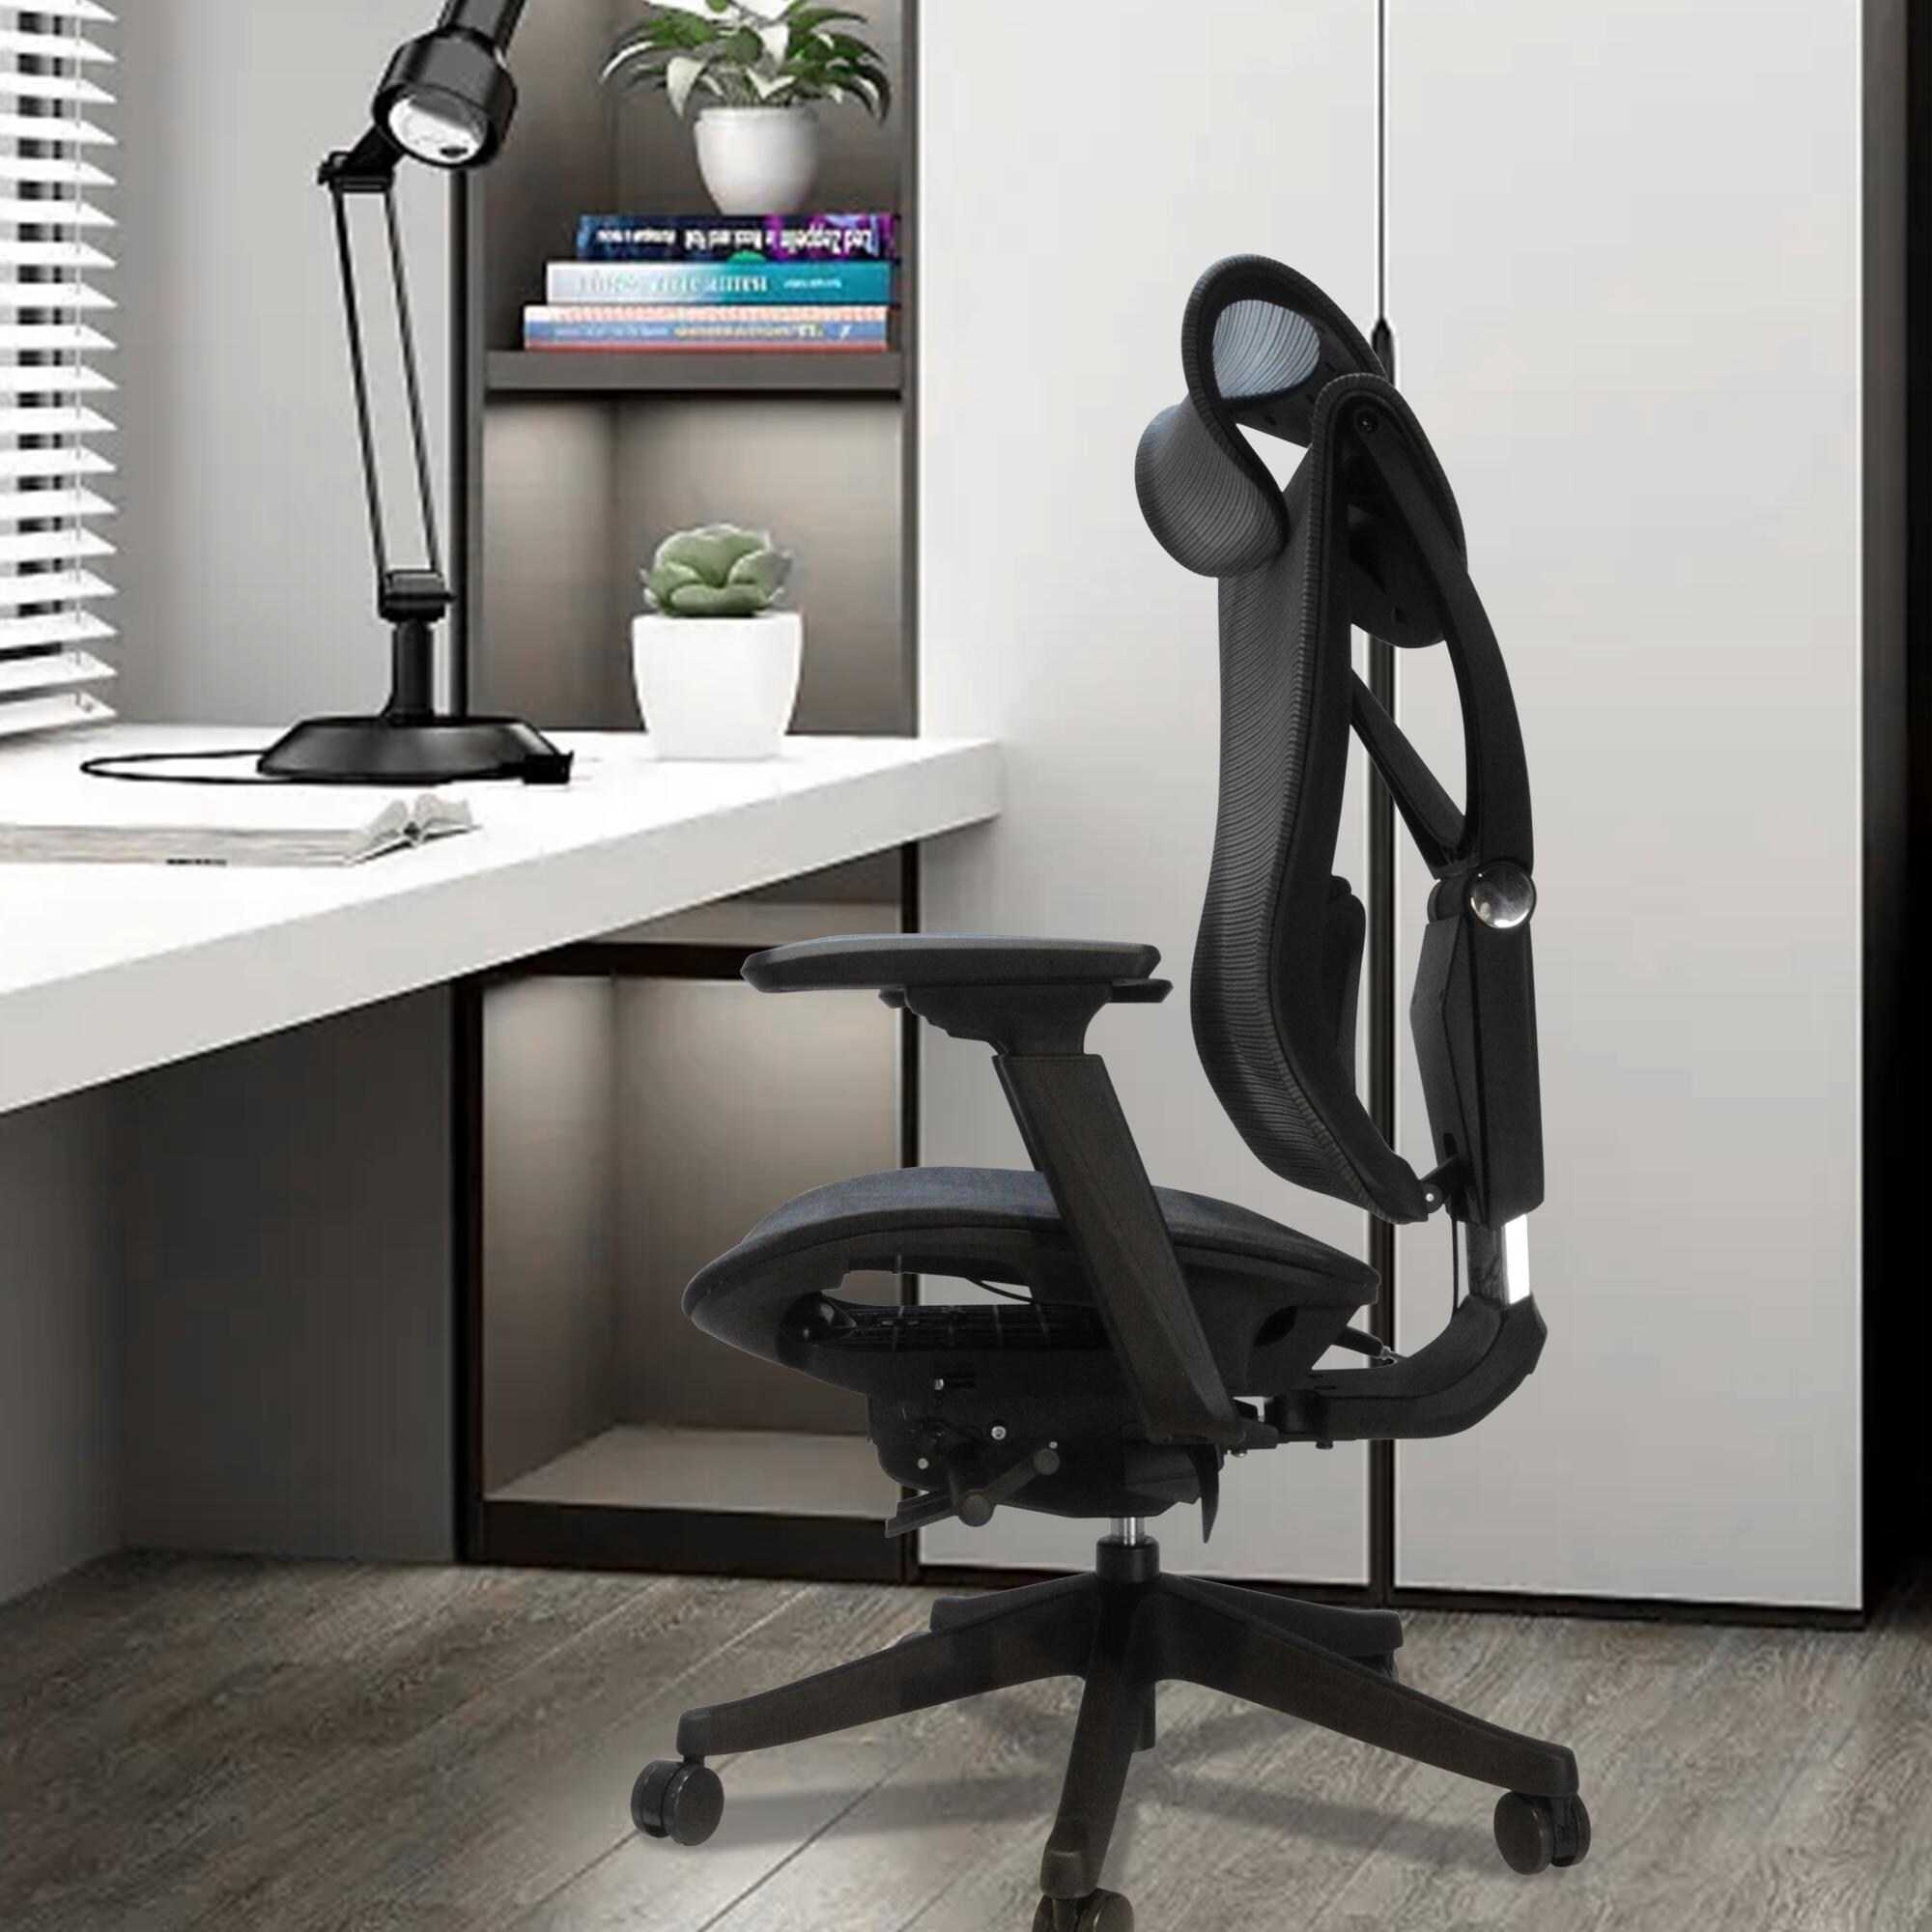 Big and Tall Office Chair with Adjustable lumbar and slide seats,Headrest and 4d armrest,tilt function max degree is 115°